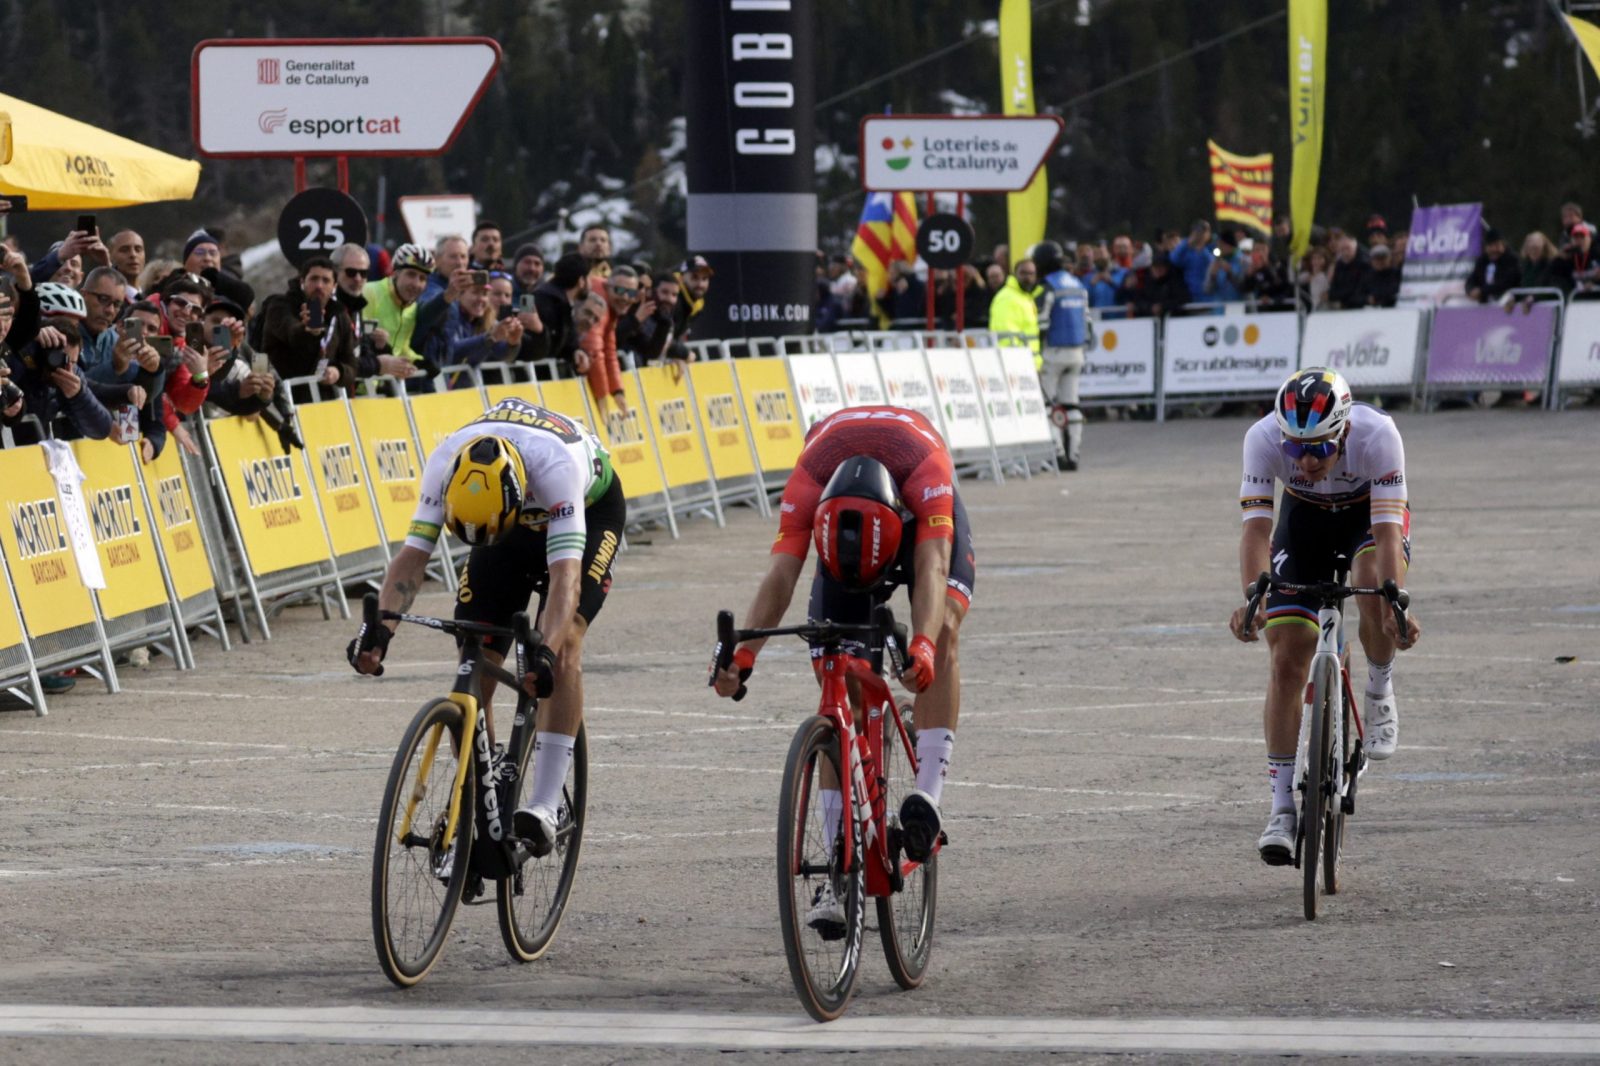 epa10535341 Italian cyclist Giulio Ciccone (C), of Trek-Segafredo team, wins the second stage of the Volta a Catalunya, a sprint starting and ending in Alto de Vallter, Girona, Catalonia, Spain, 21 March 2023. Slovenian Primoz Roglic (L) of Jumbo-Visma, won the second place and Remco Evenepoel of Quick-Step, was third.  EPA/Quique Garcia